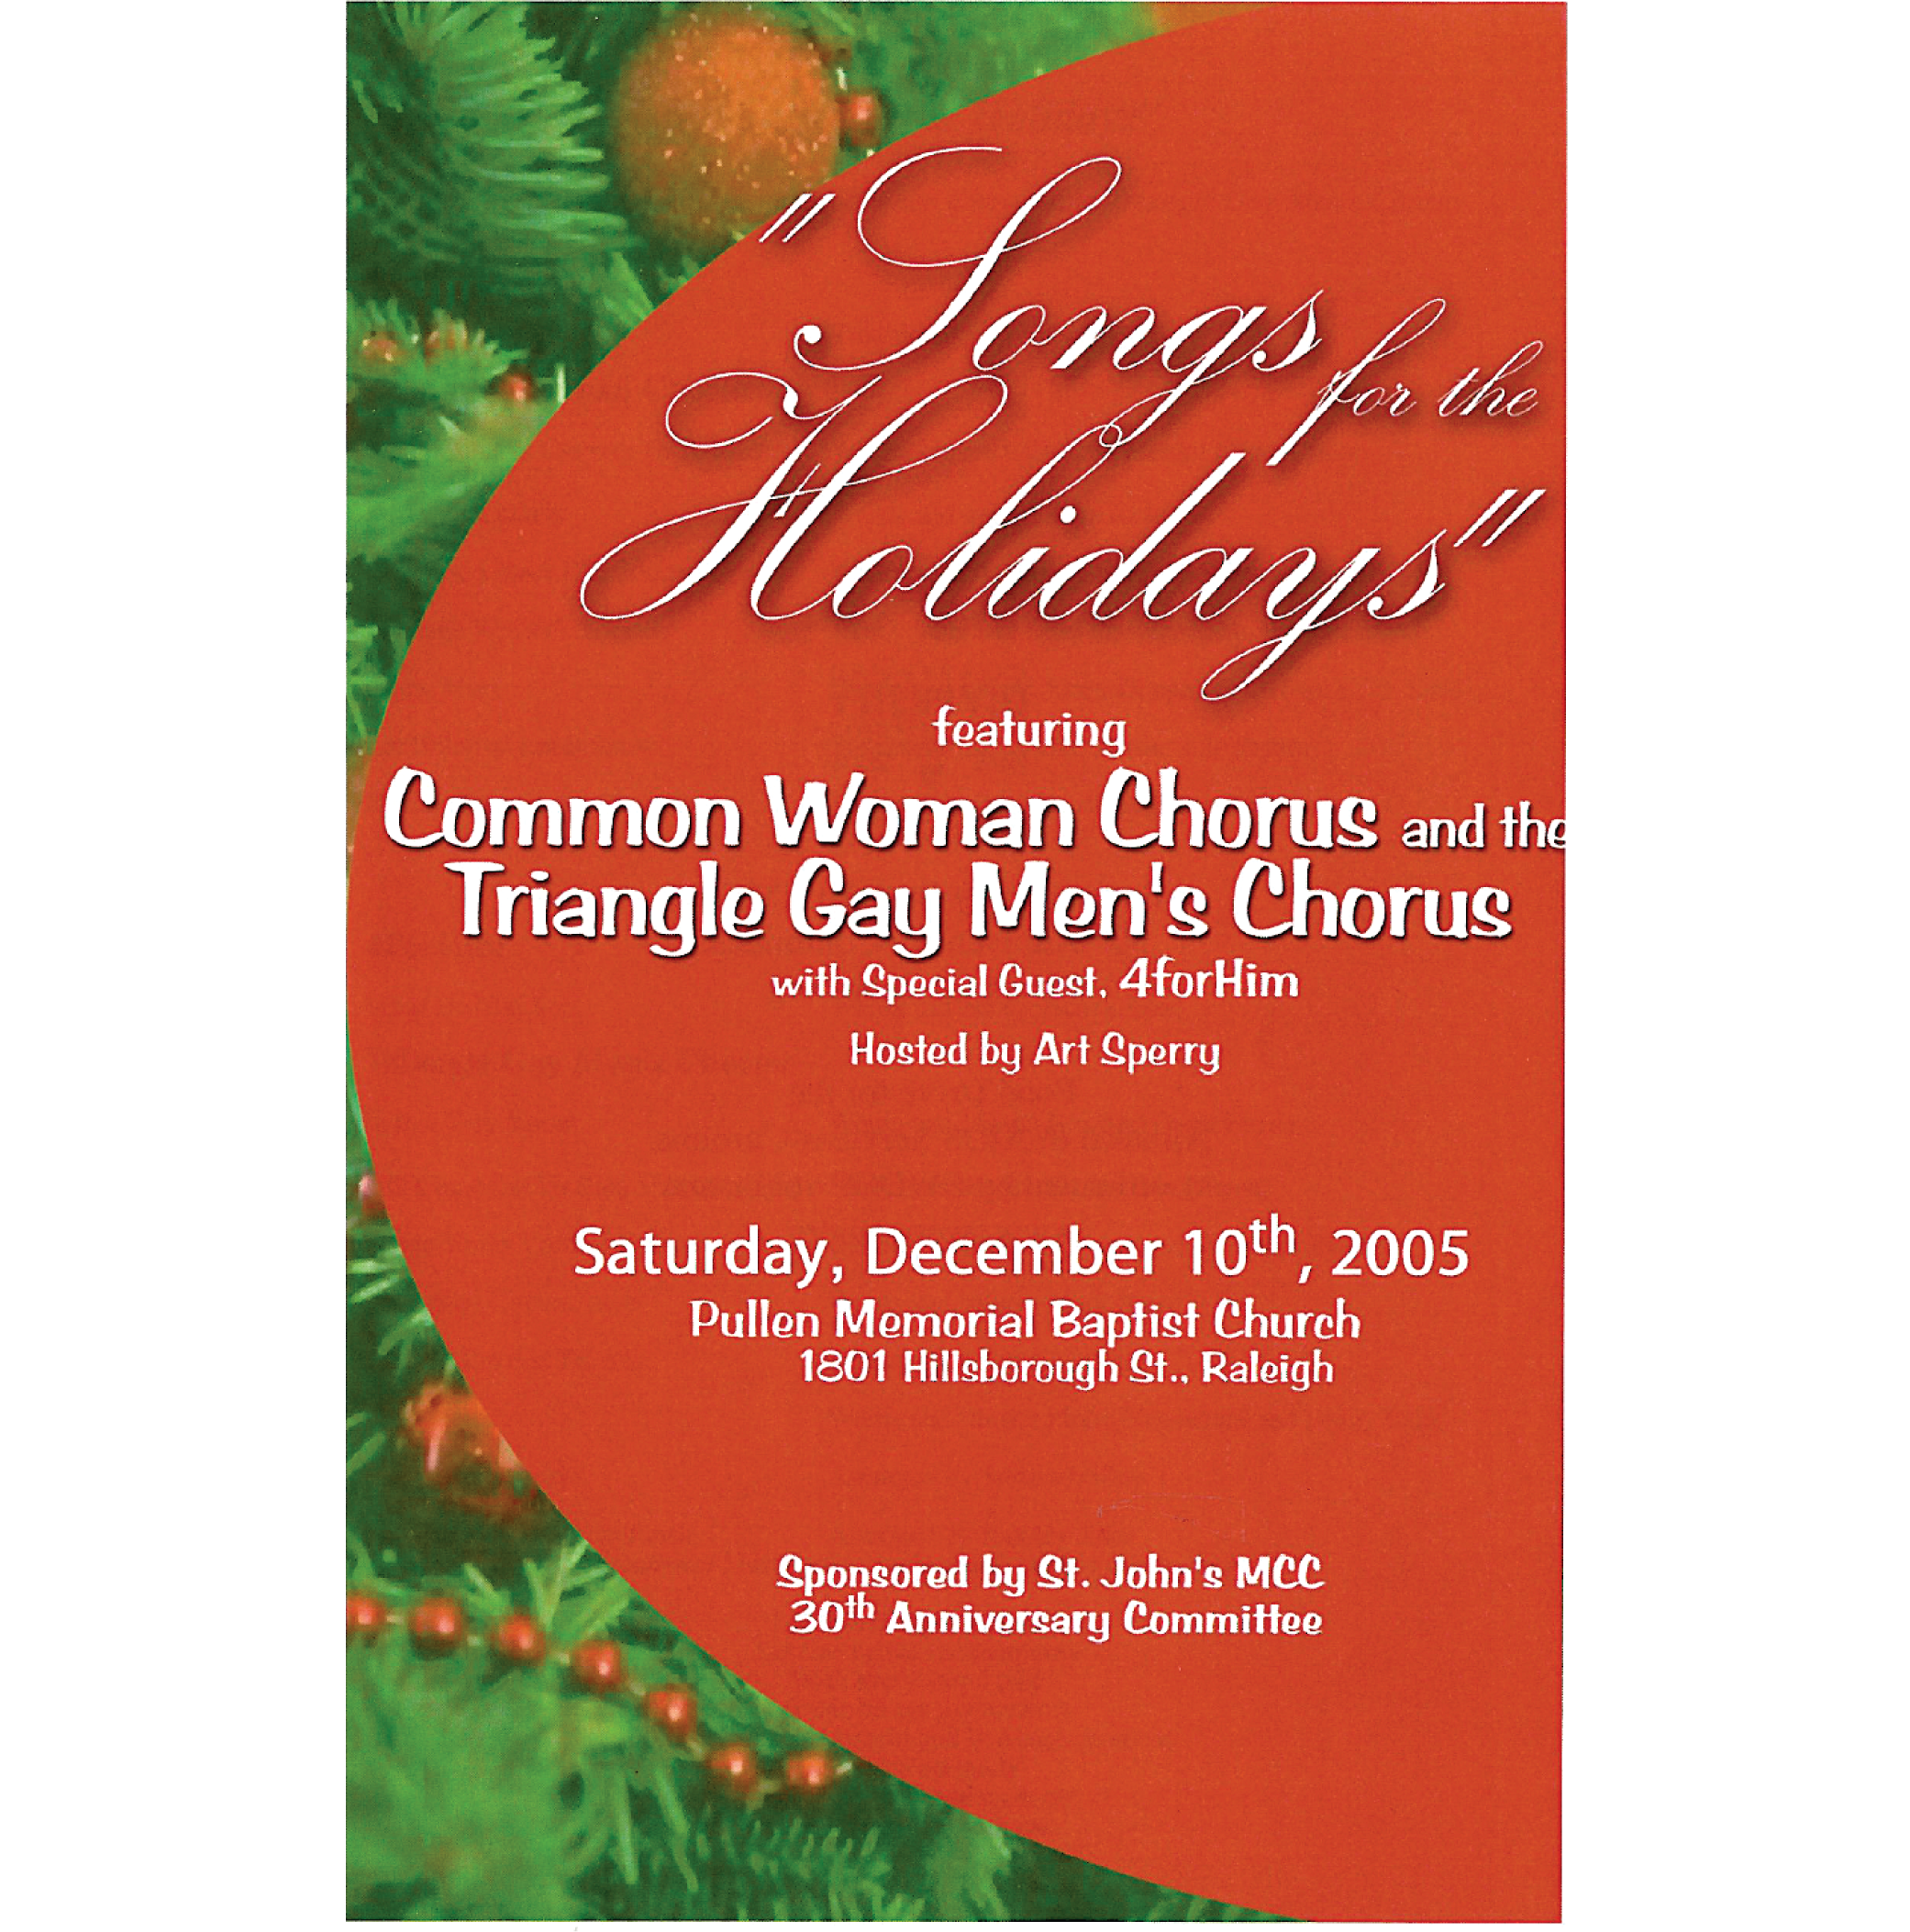 Songs for the Holidays with TGMC 2005